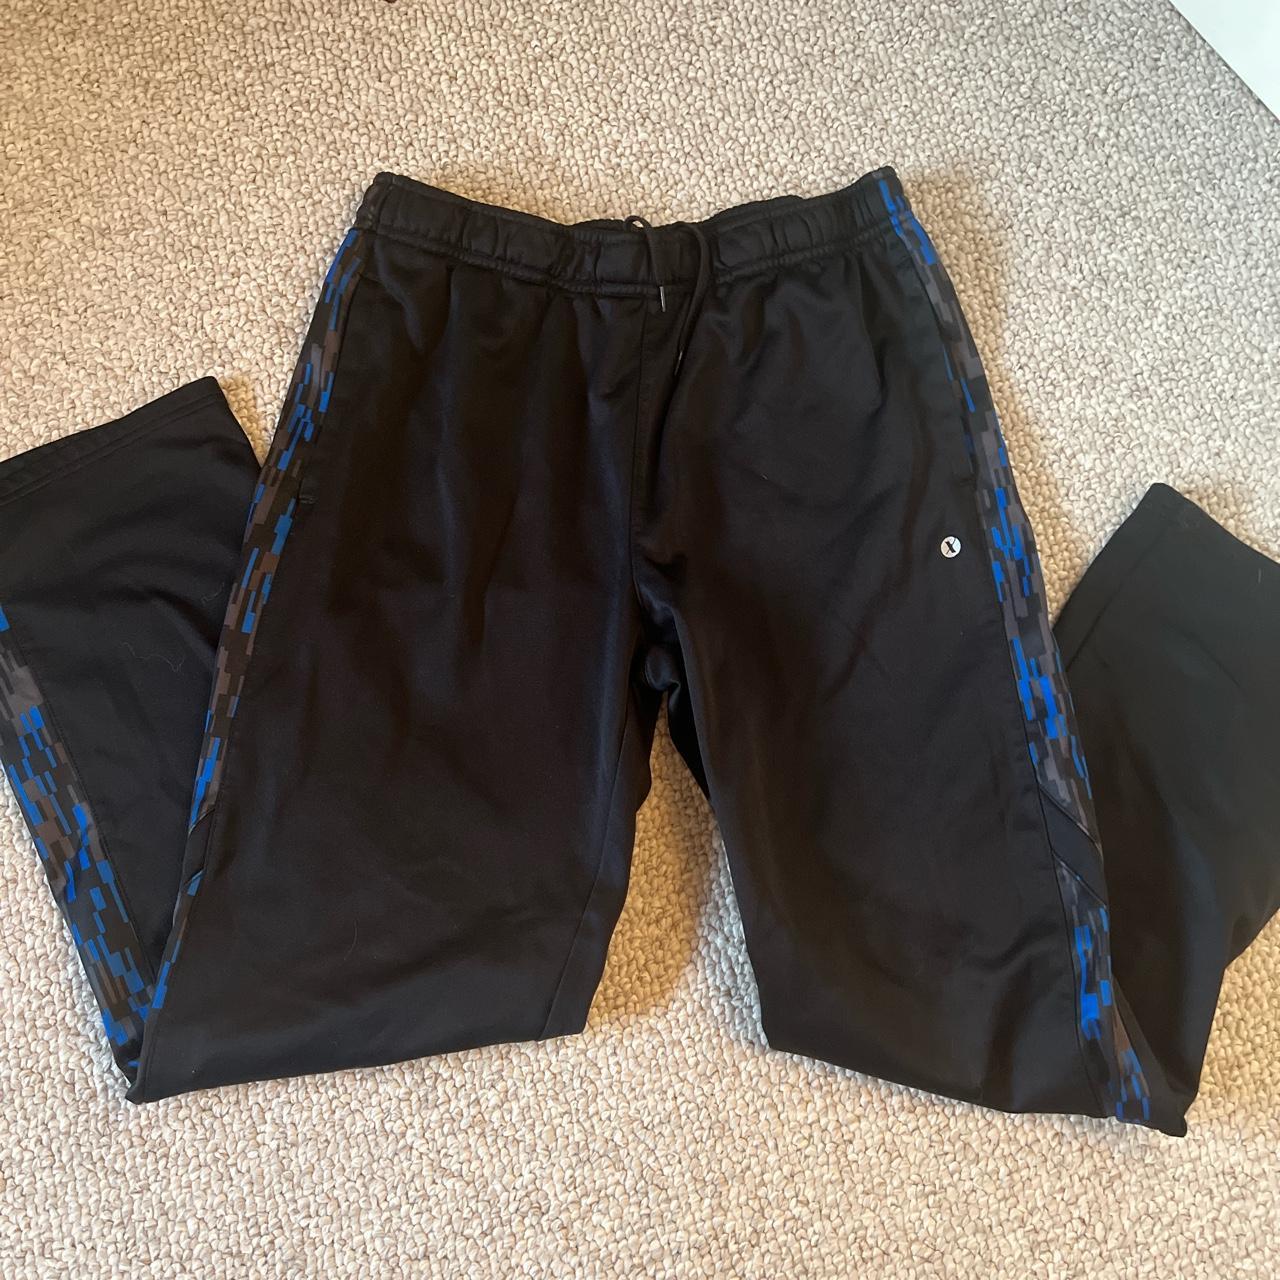 Blue and black Xersion activewear pants with - Depop